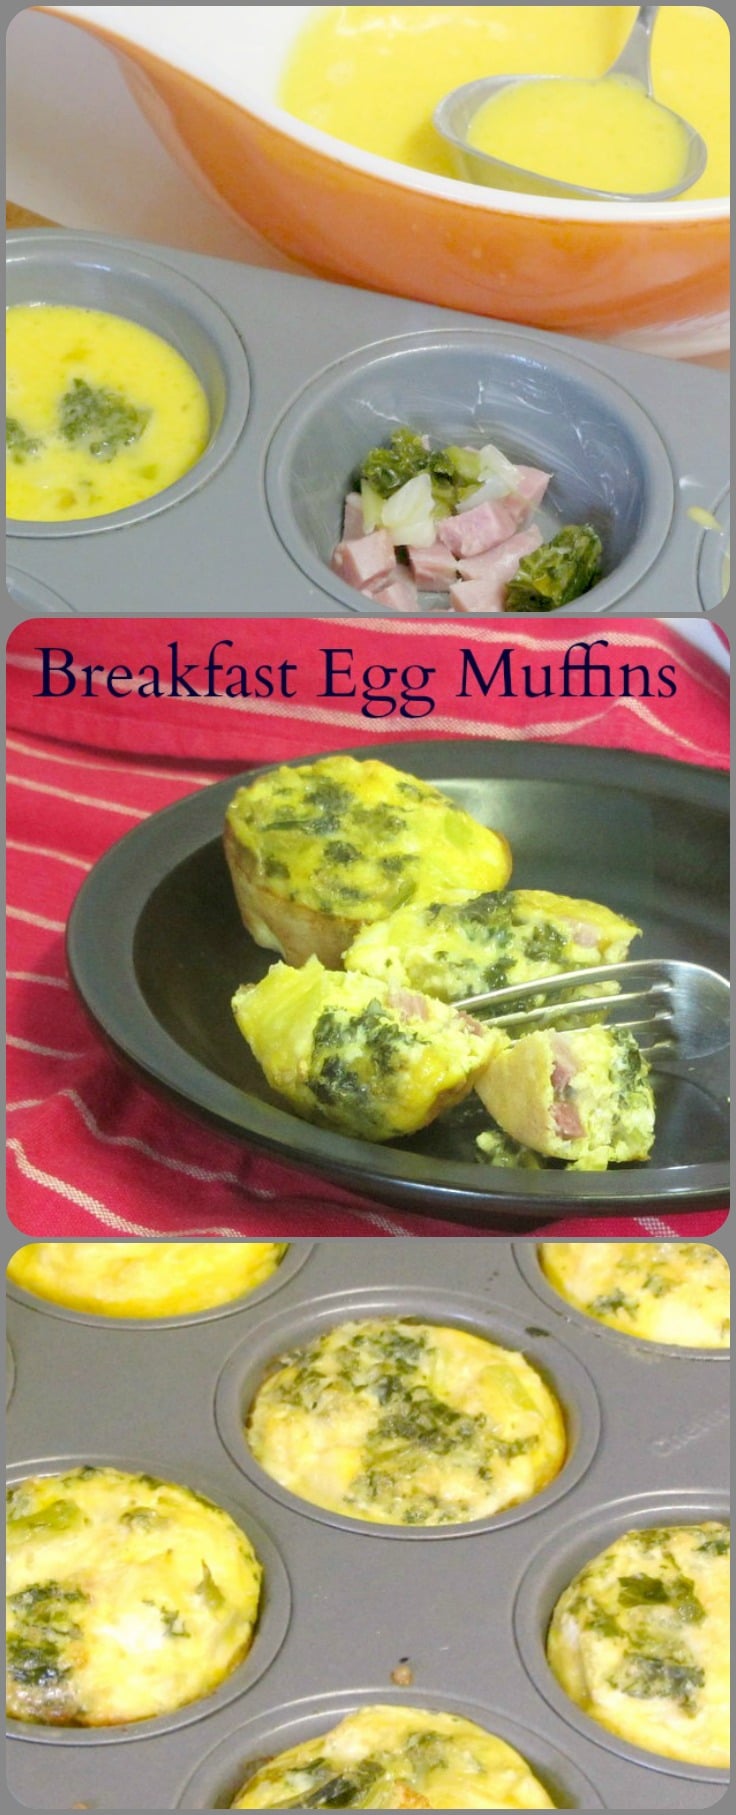 Bake egg muffins with ham for breakfast - serve at once, or reheat for an easy meal.